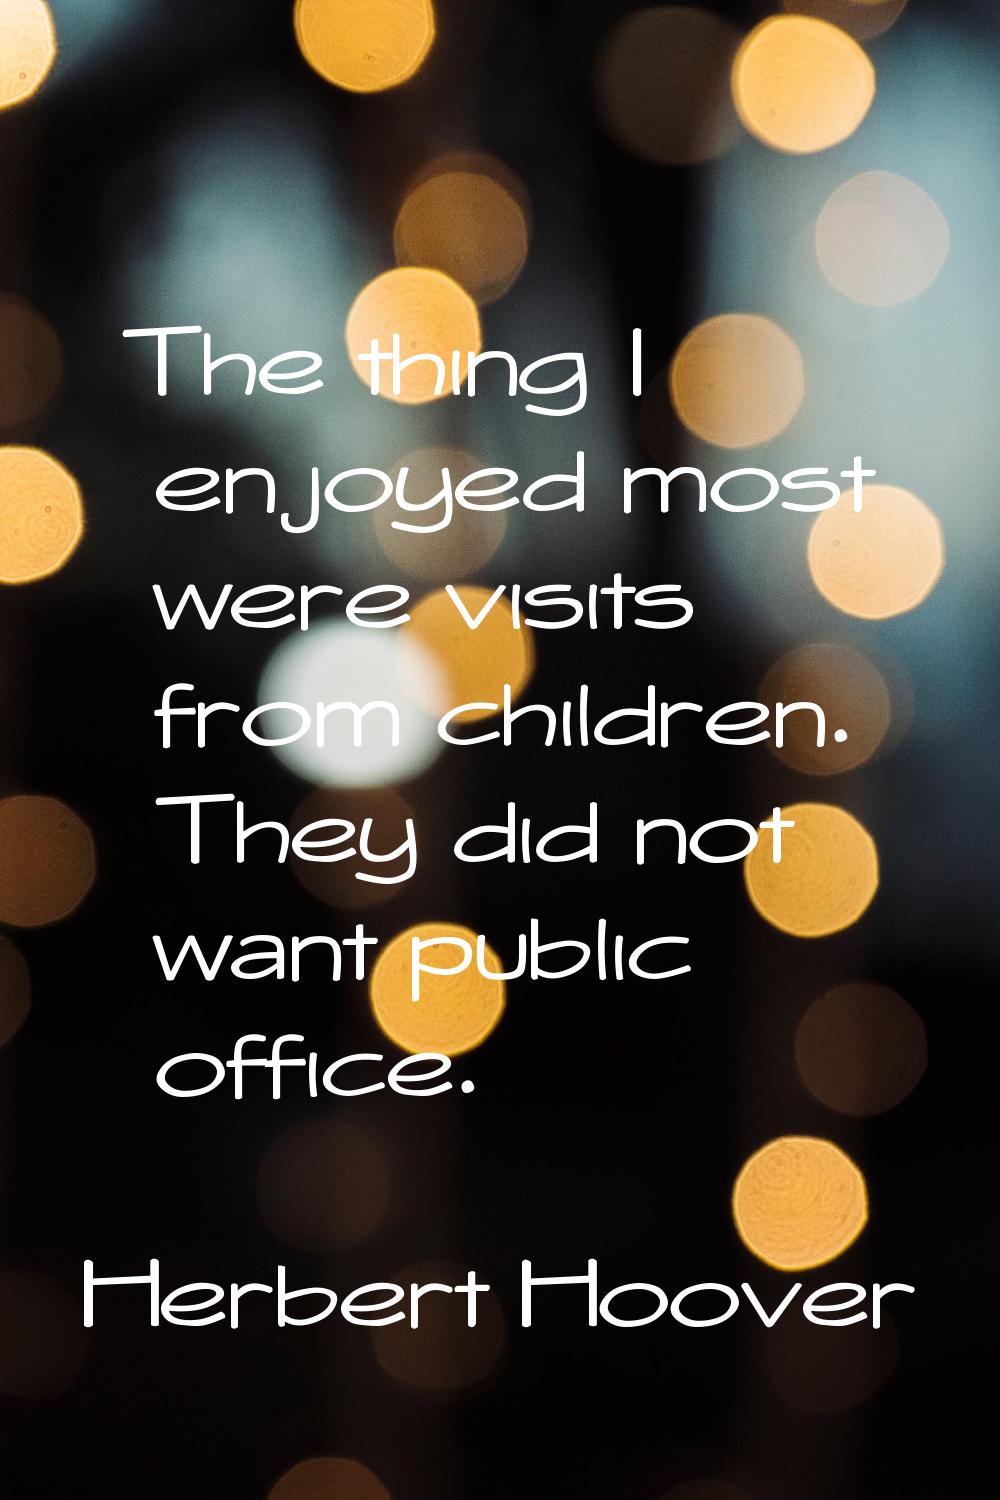 The thing I enjoyed most were visits from children. They did not want public office.